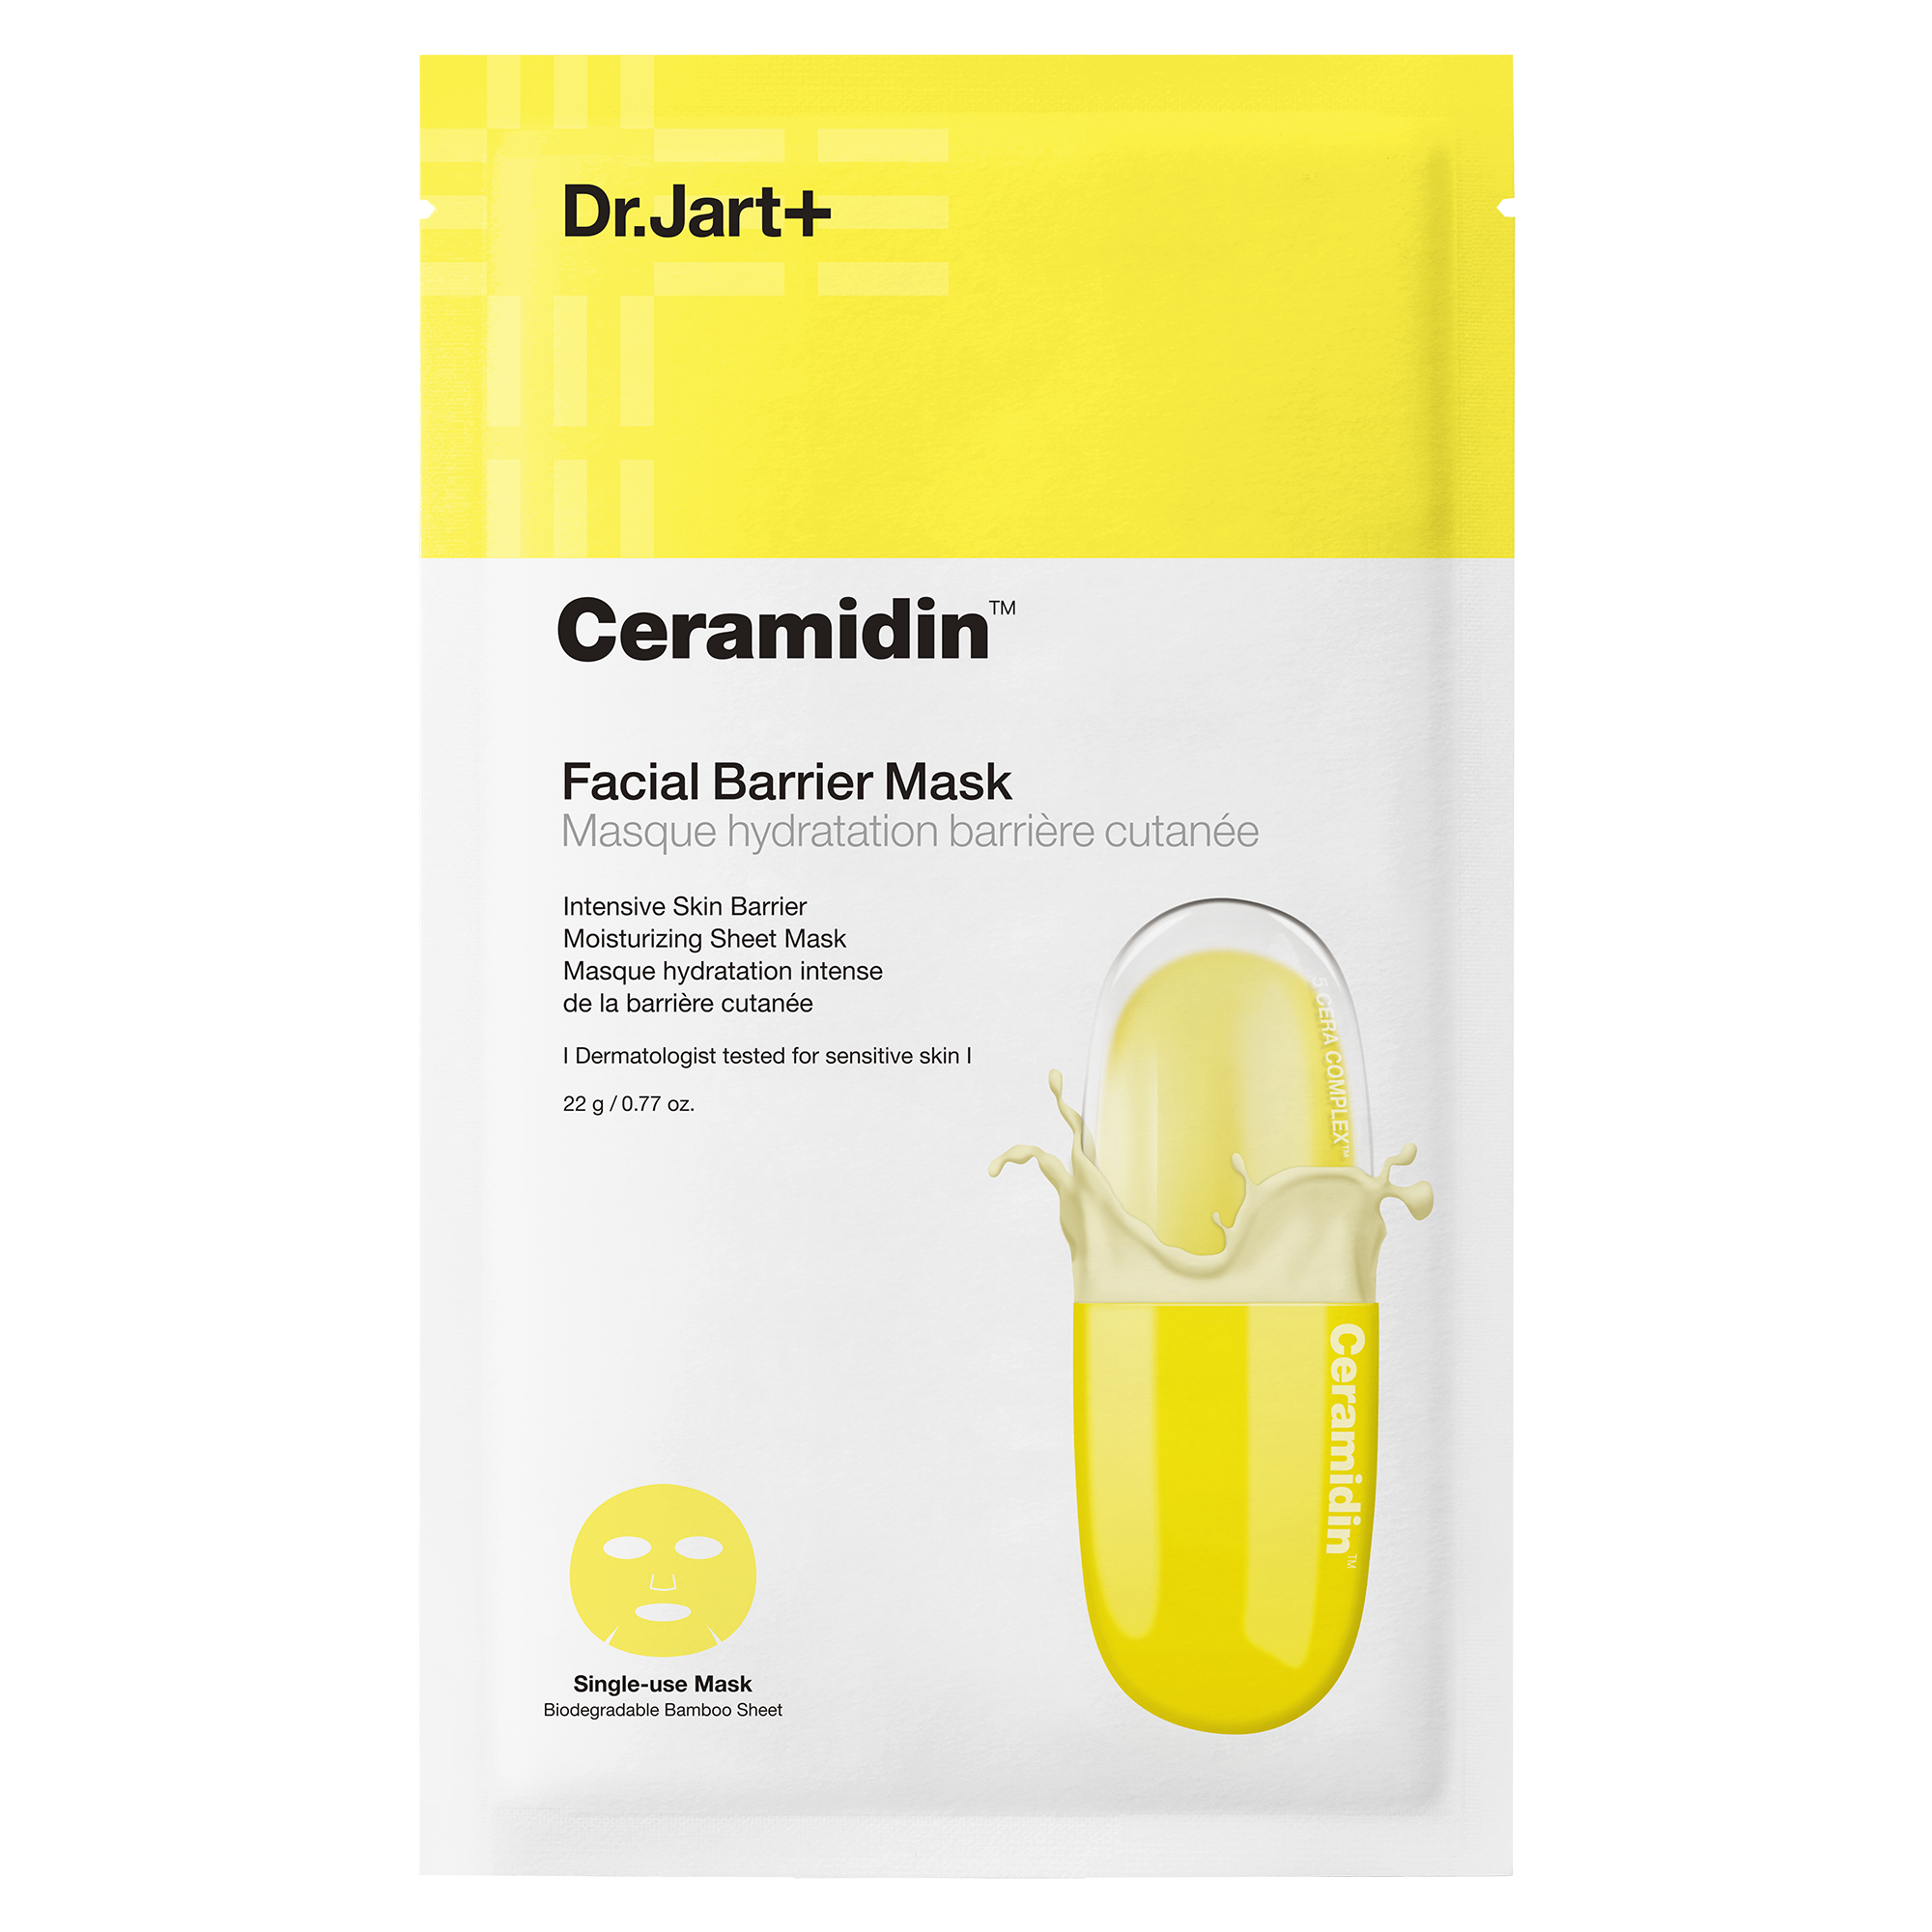 Spend €30 in Dr. Jart+ products and get a Ceramidin Mask